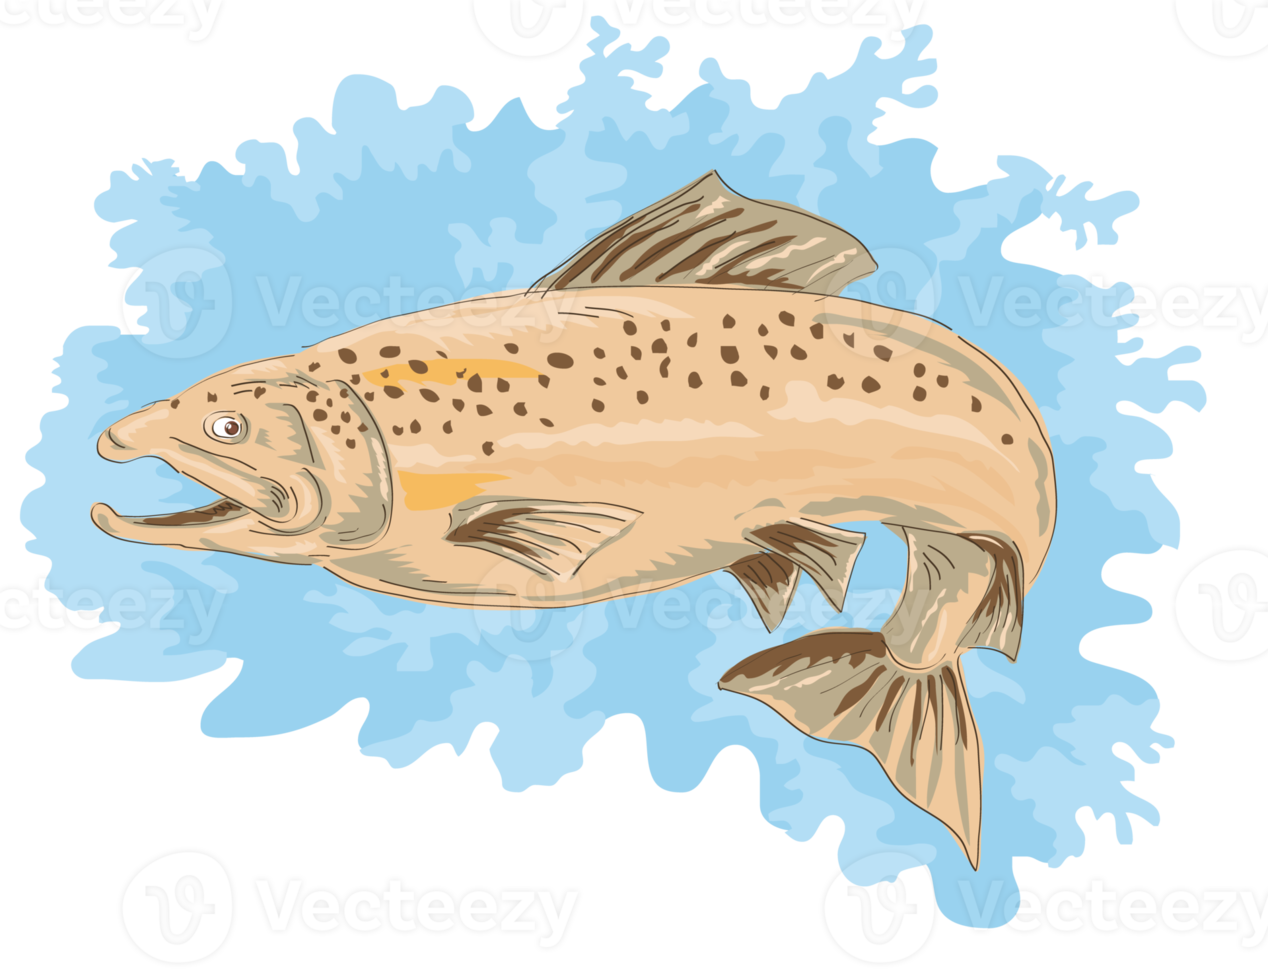 forel vis jumping png